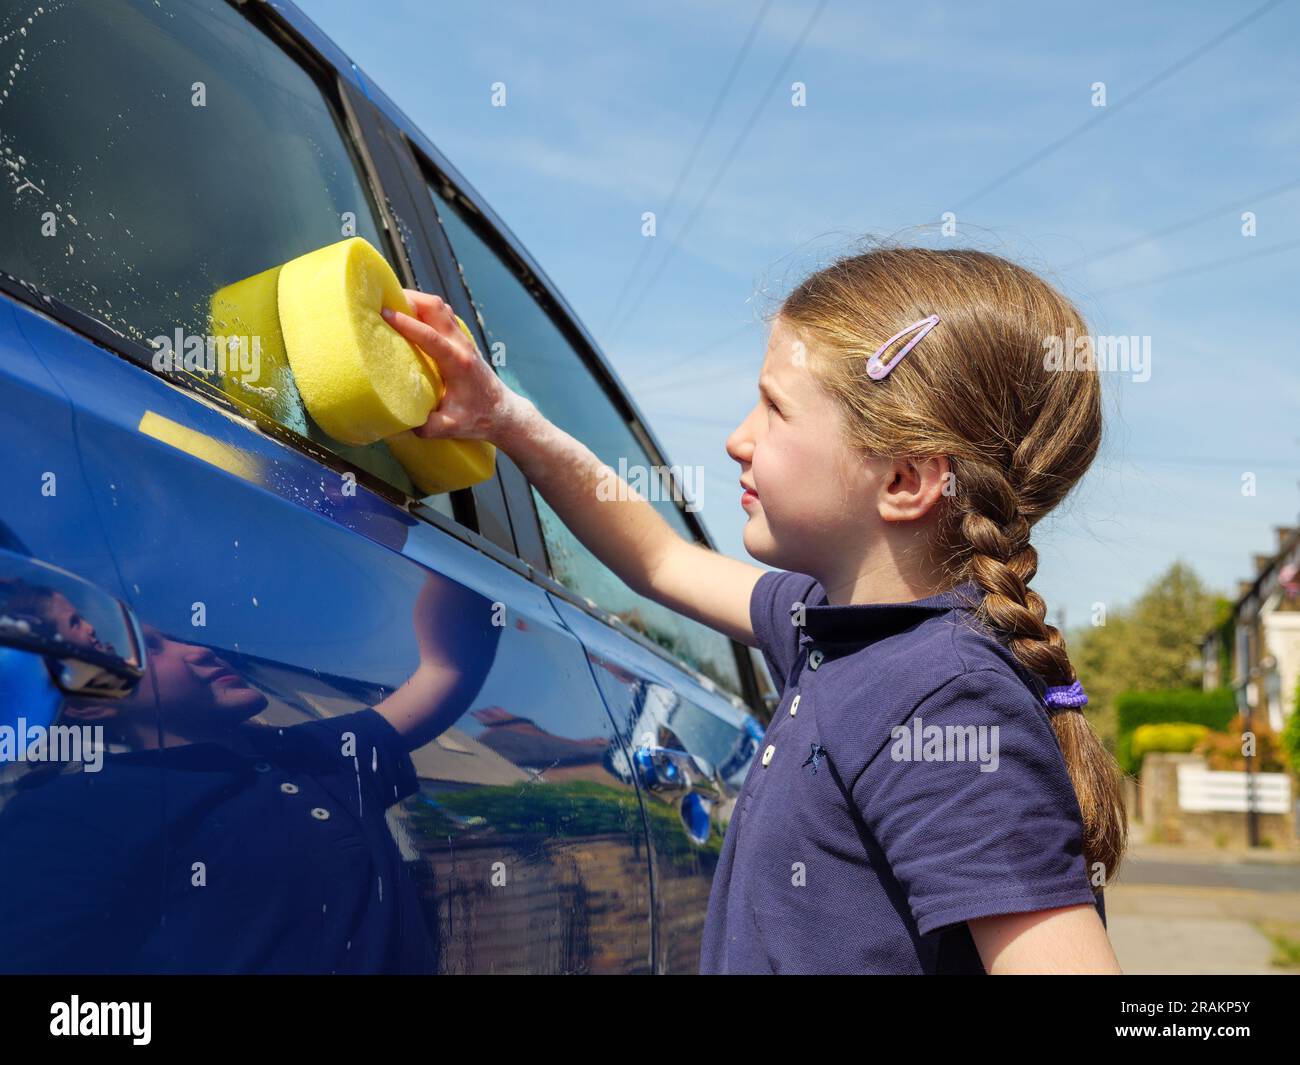 kids cleaning cars｜TikTok Search